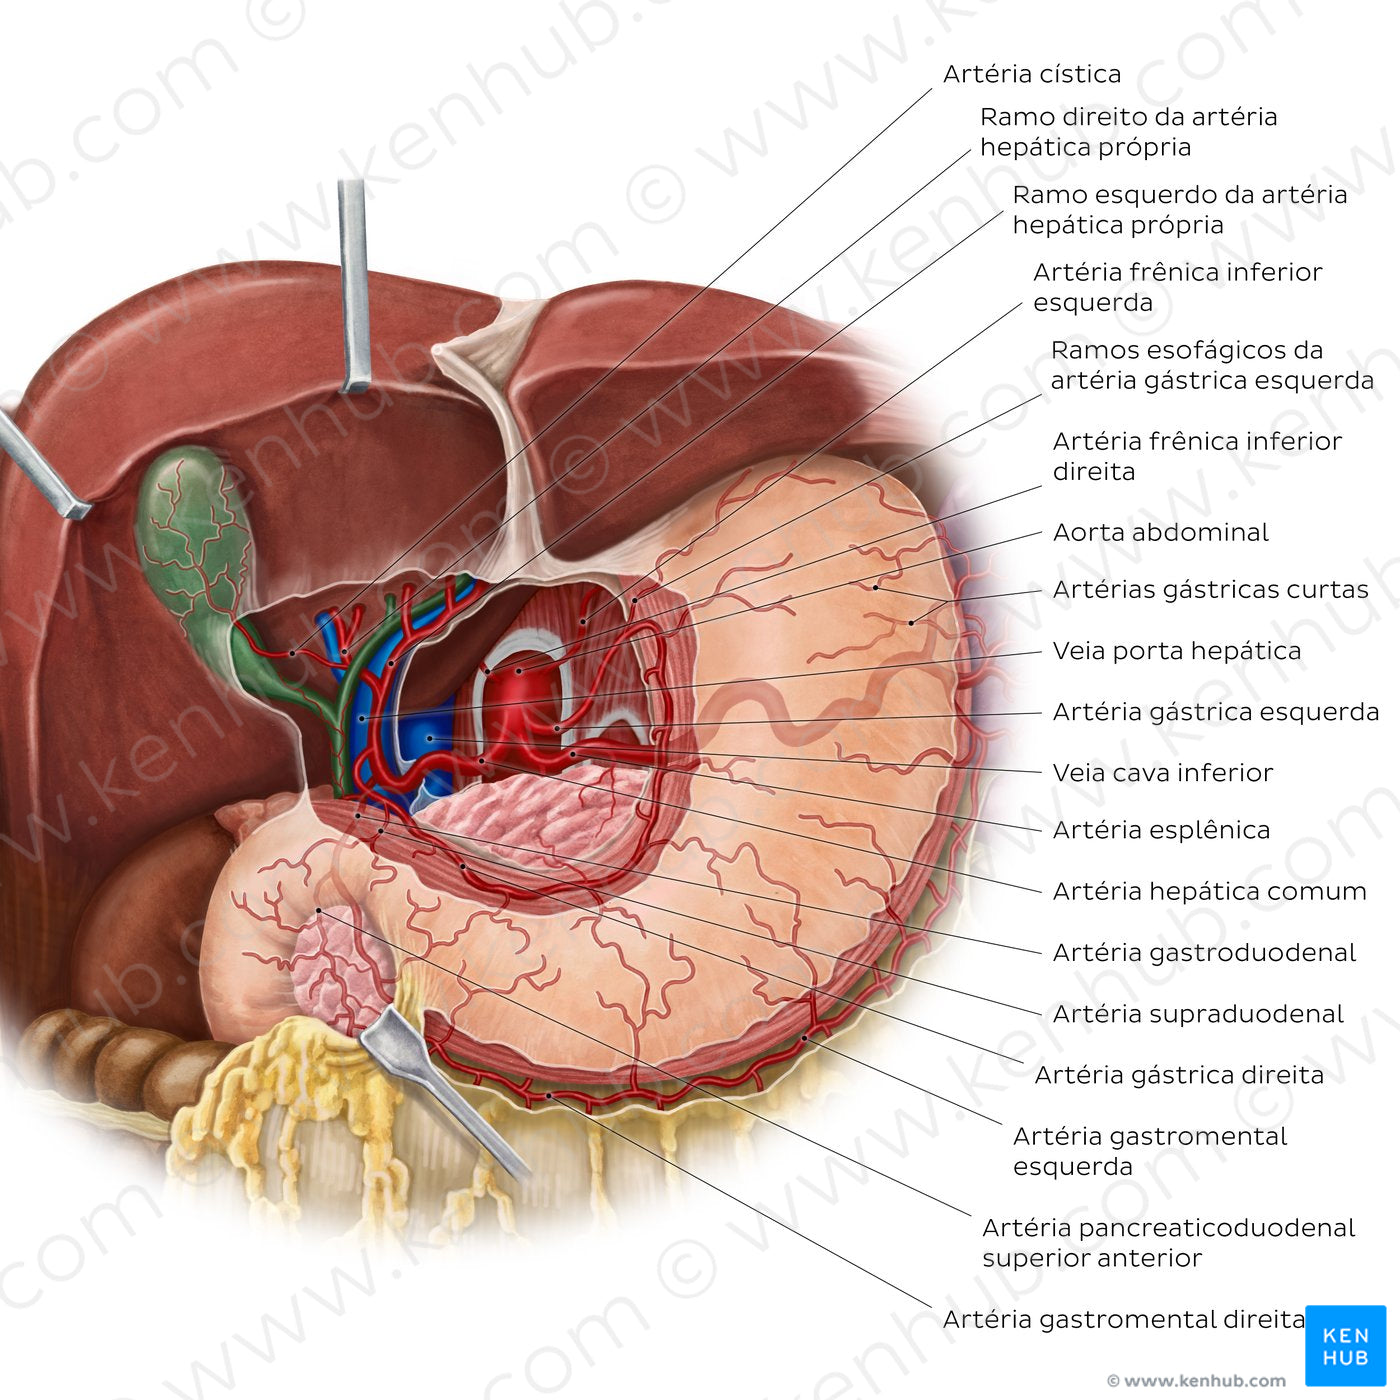 Arteries of the stomach, liver and spleen (Portuguese)